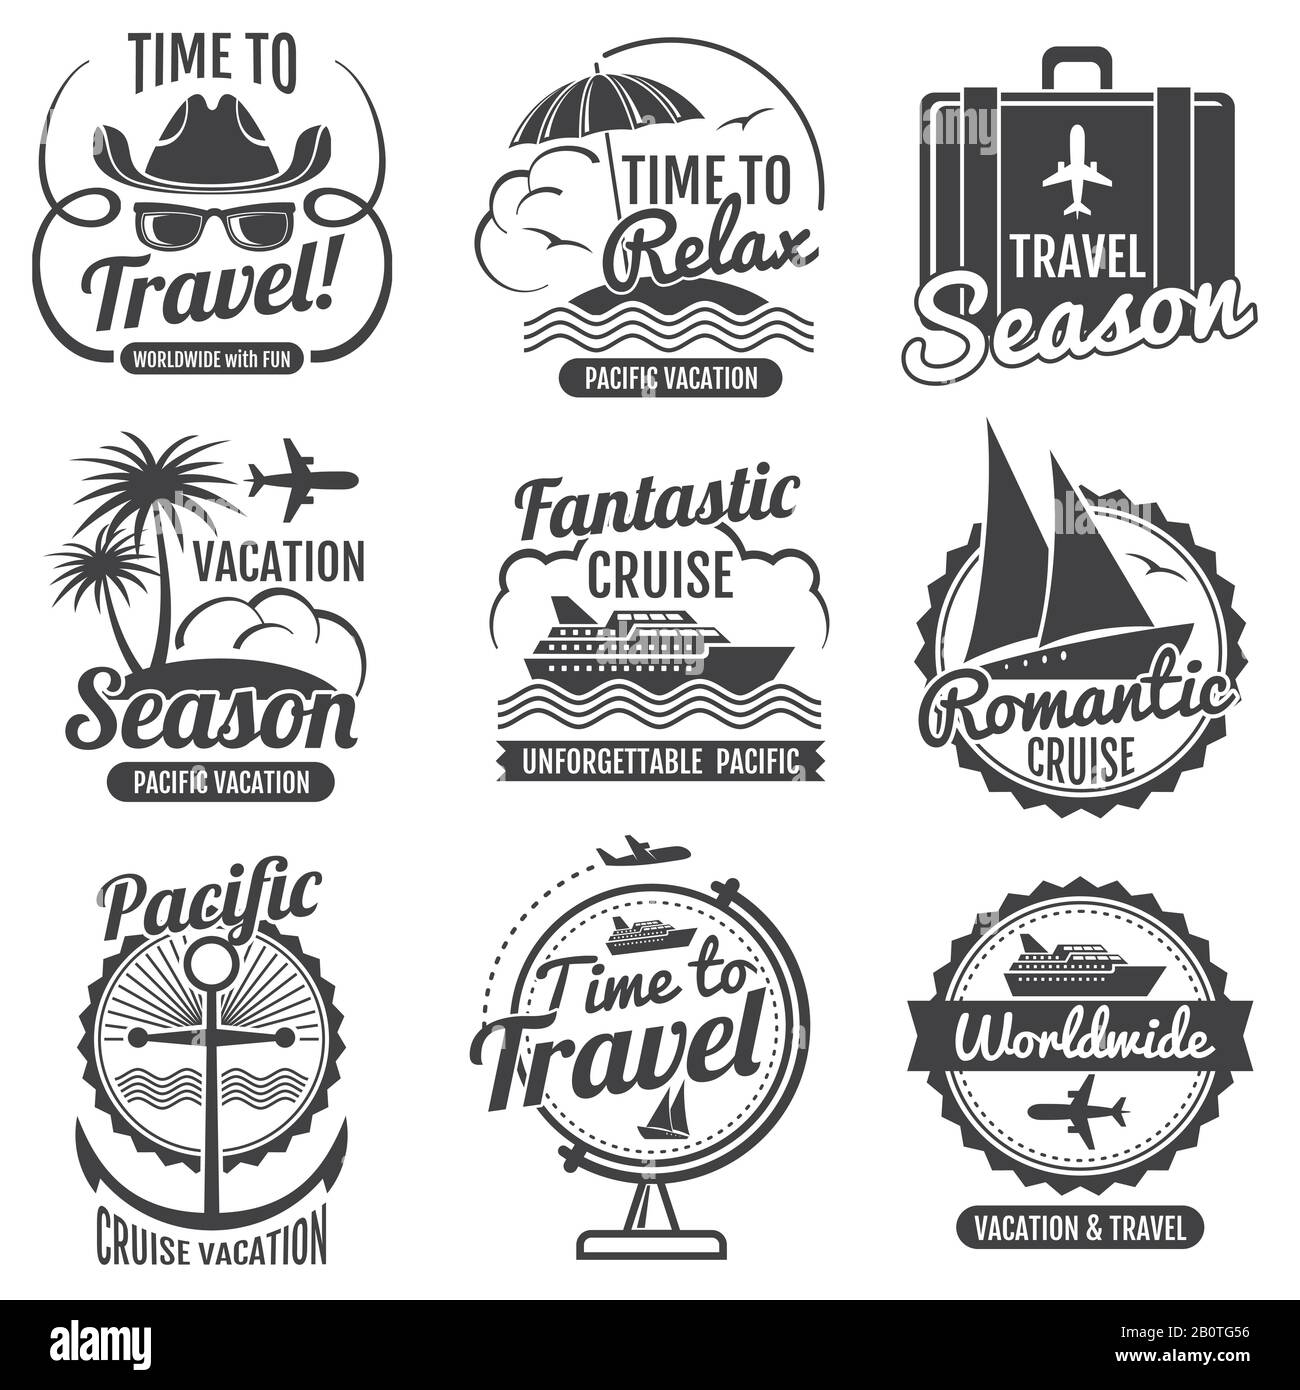 Travel adventure vector vintage labels and emblems. Vintage logo vacation, illustration of logo romantic cruise Stock Vector